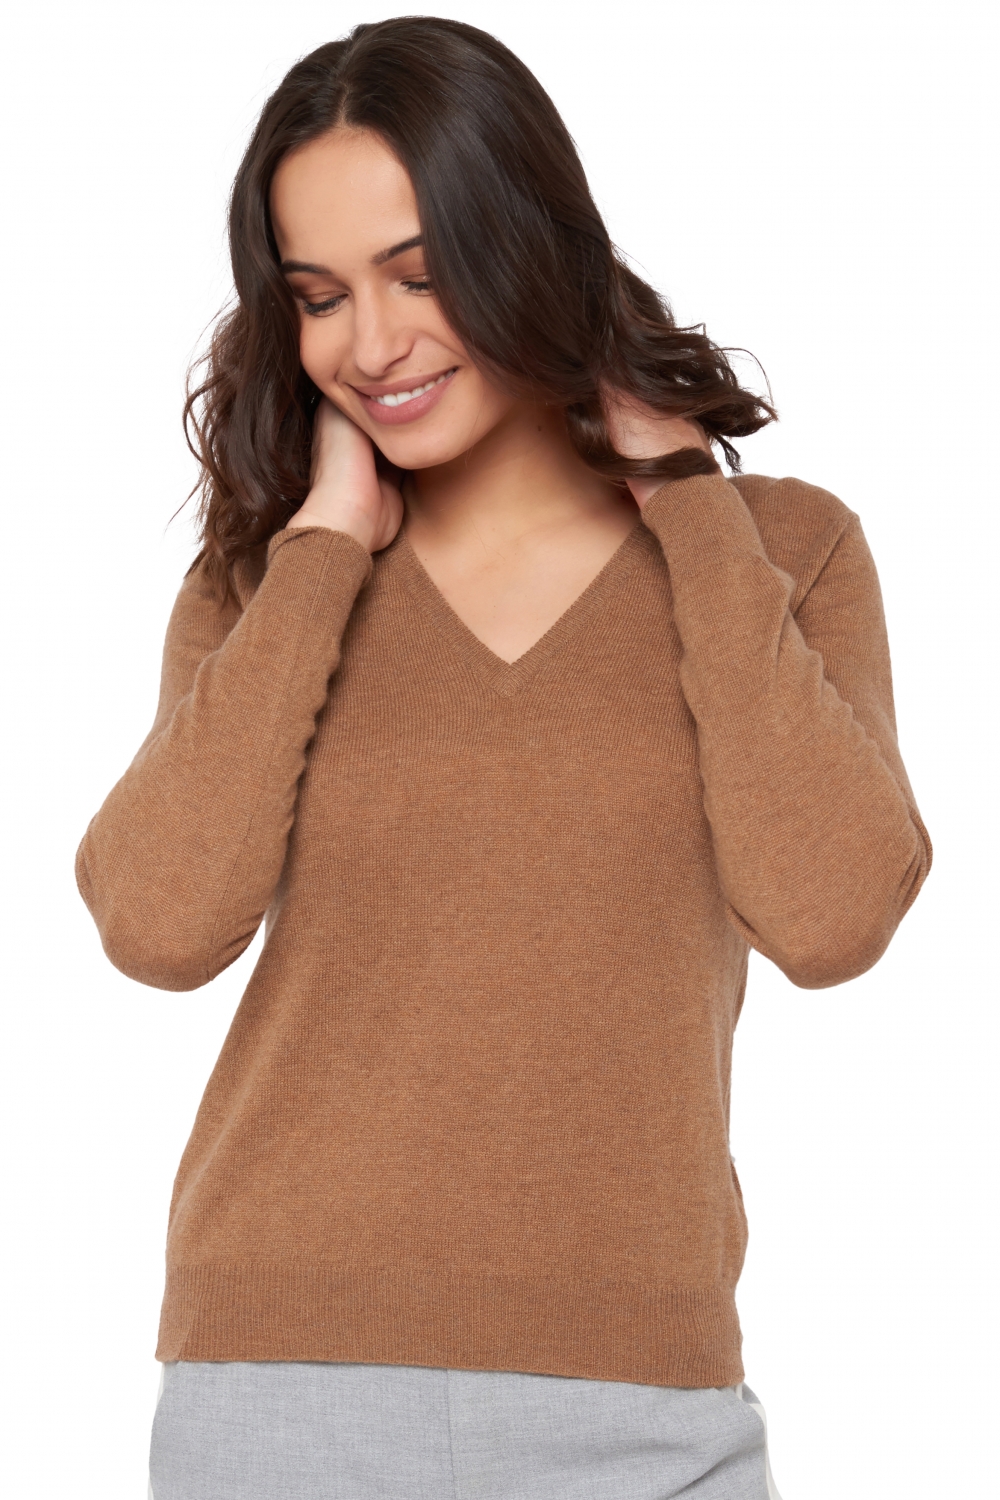 Cachemire pull femme col v faustine camel chine xl